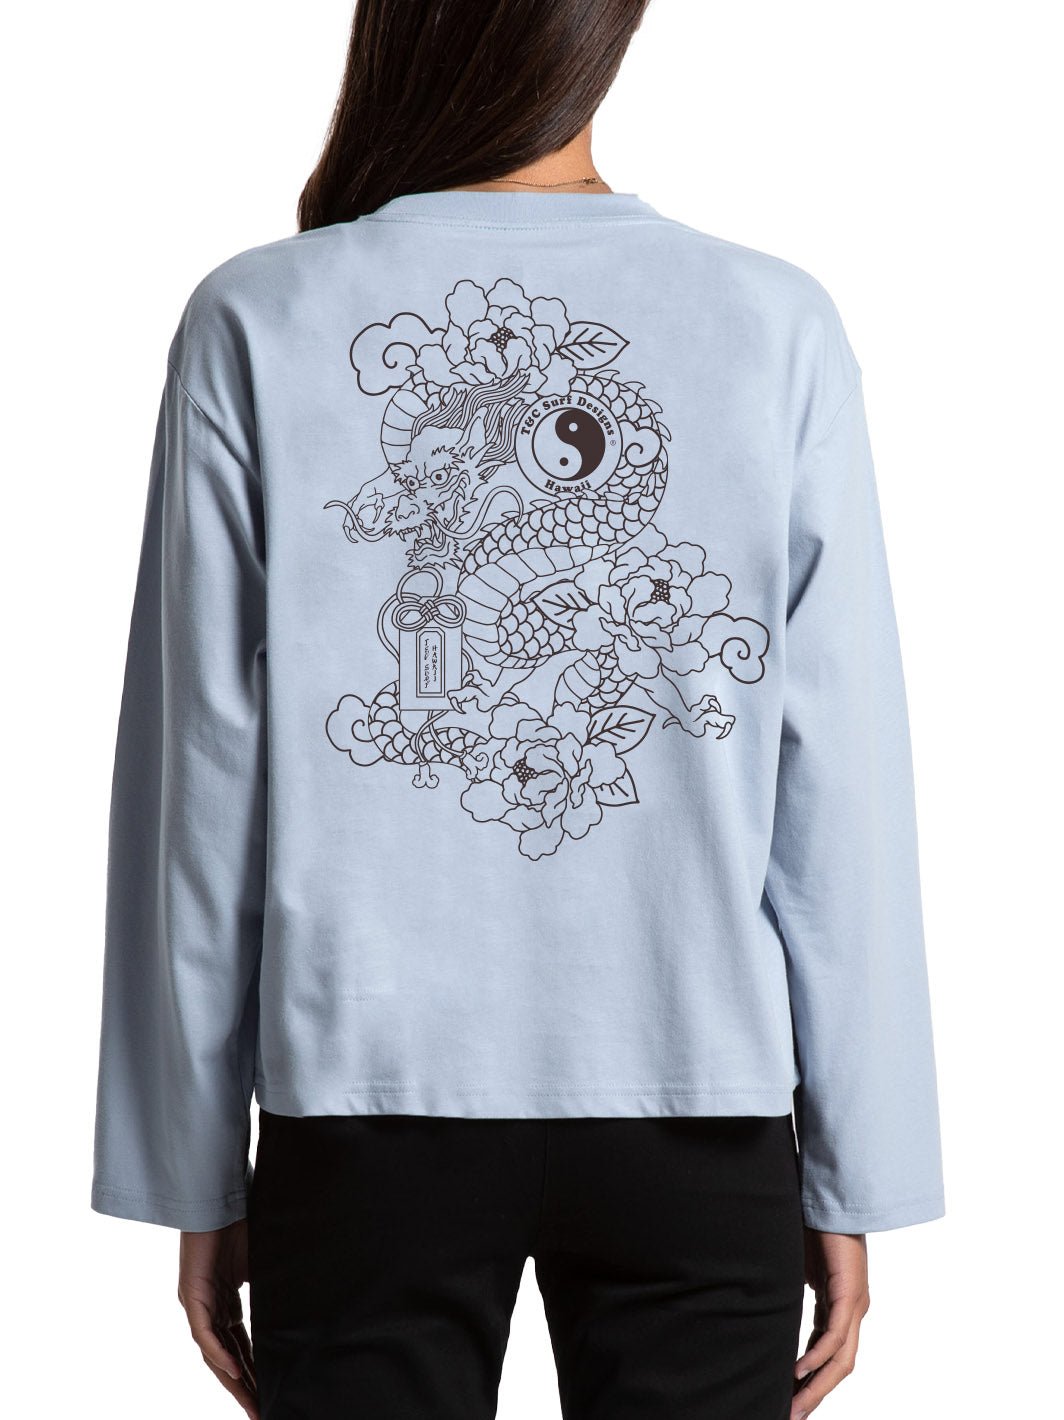 T&C Surf Designs T&C Surf Year of the Dragon 2 Long Sleeve, Powder / XS